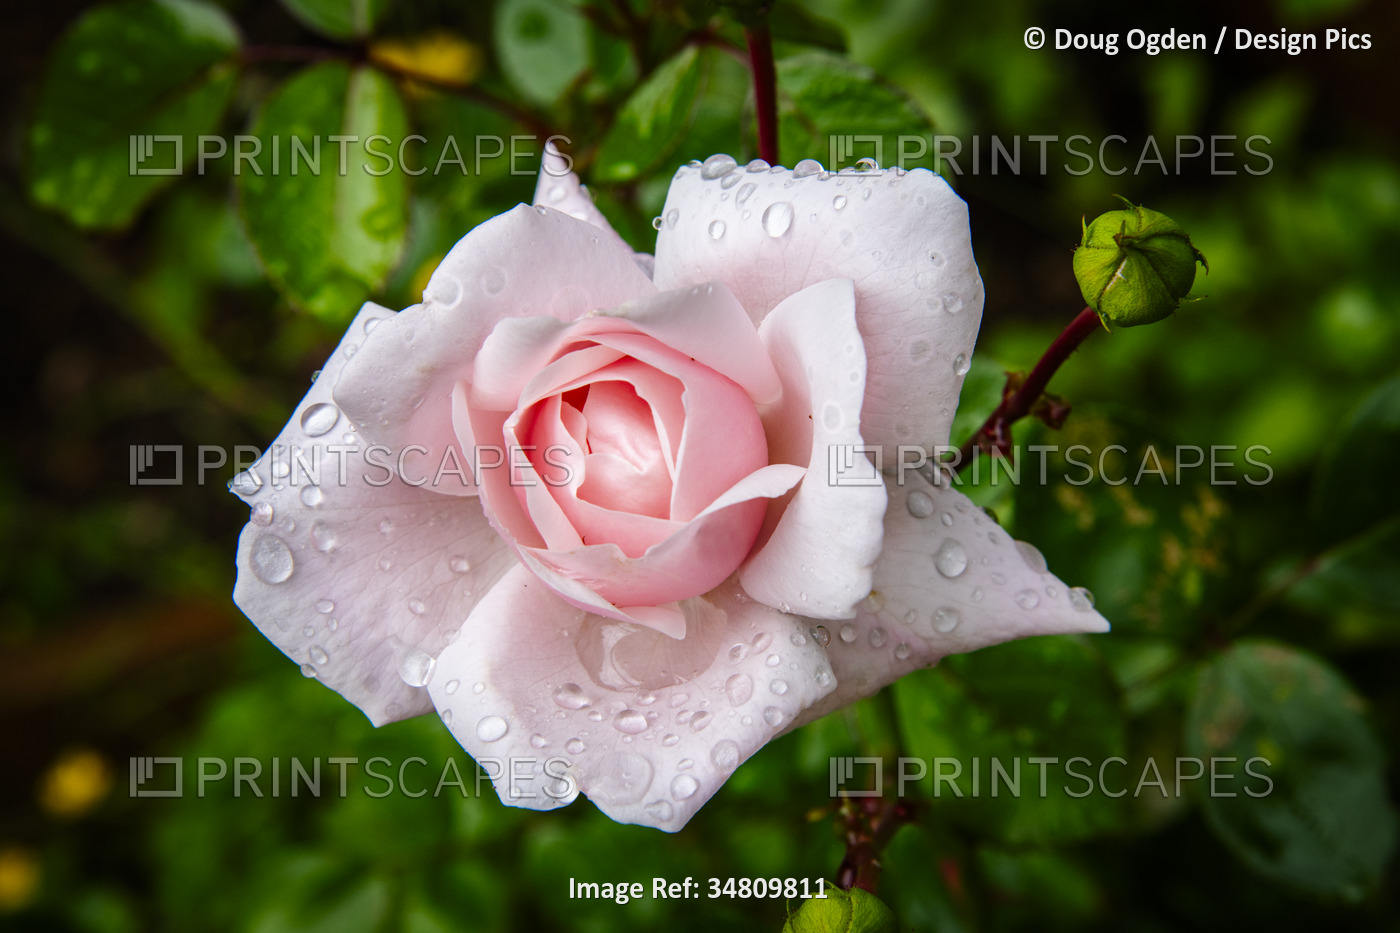 Dew drops on a classic pink rose; Olympia, Washington, United States of America